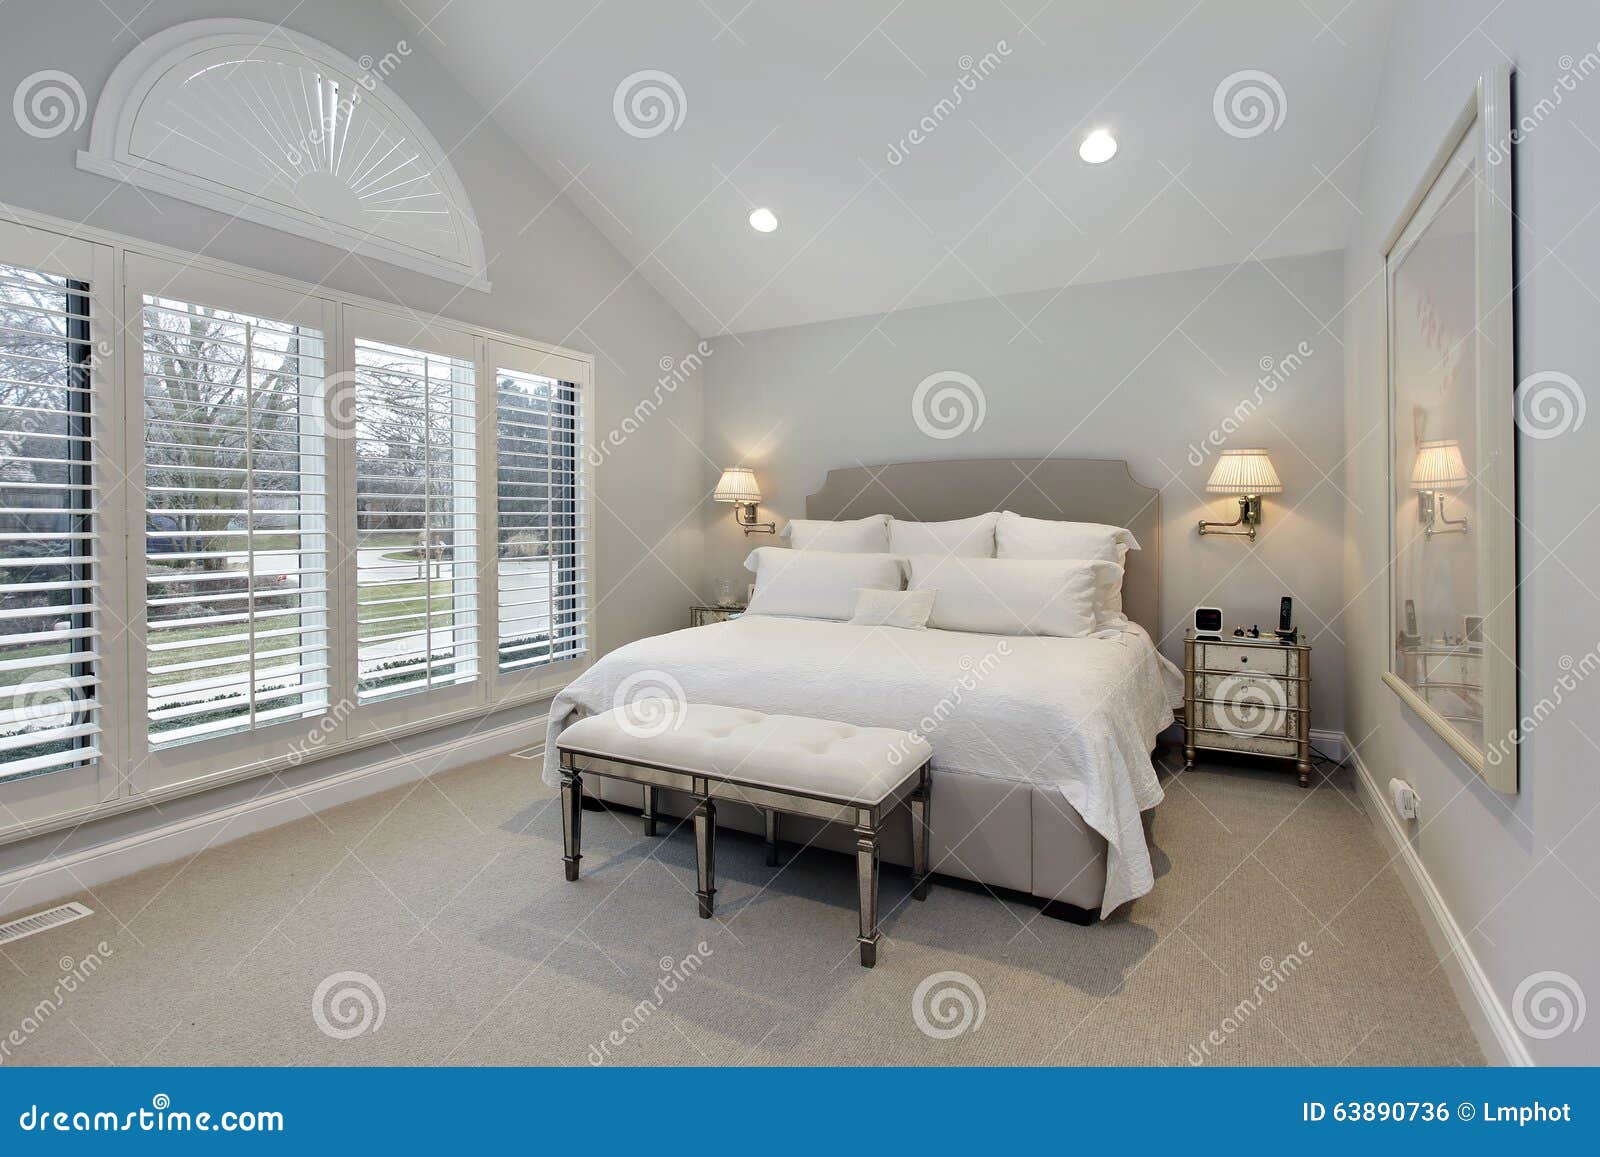 master bedroom with wall of windows